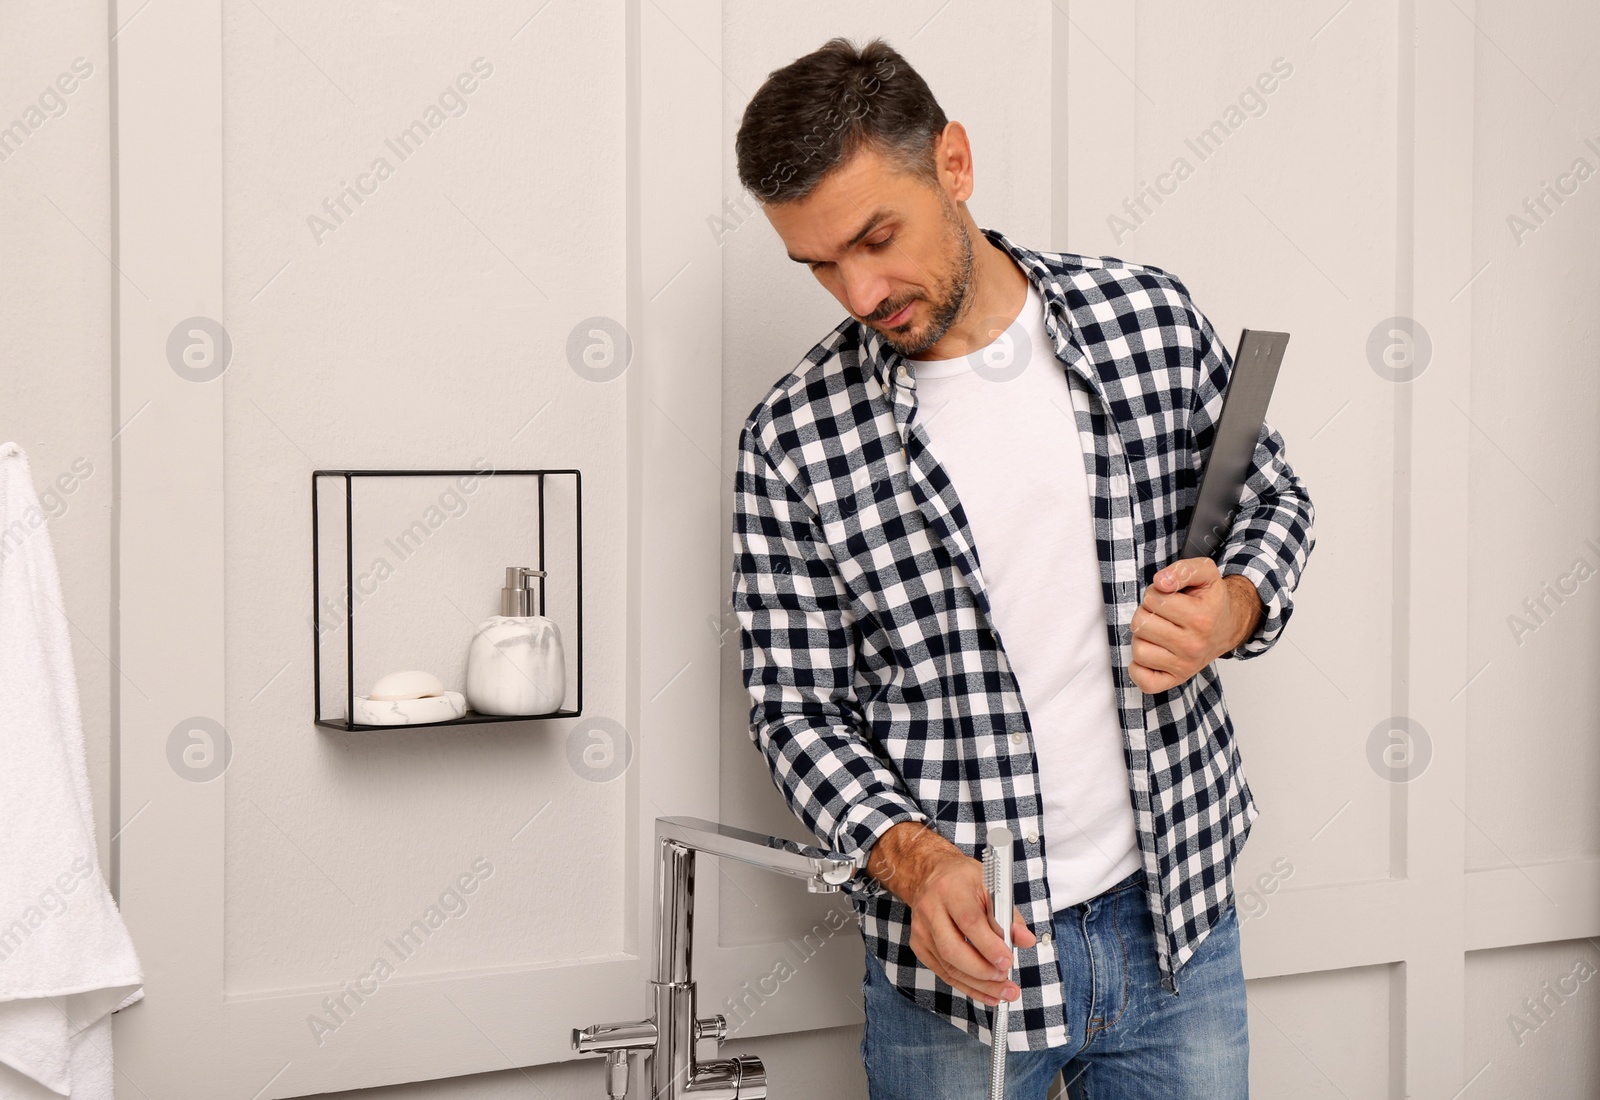 Photo of Plumber with clipboard checking water tap in bathroom